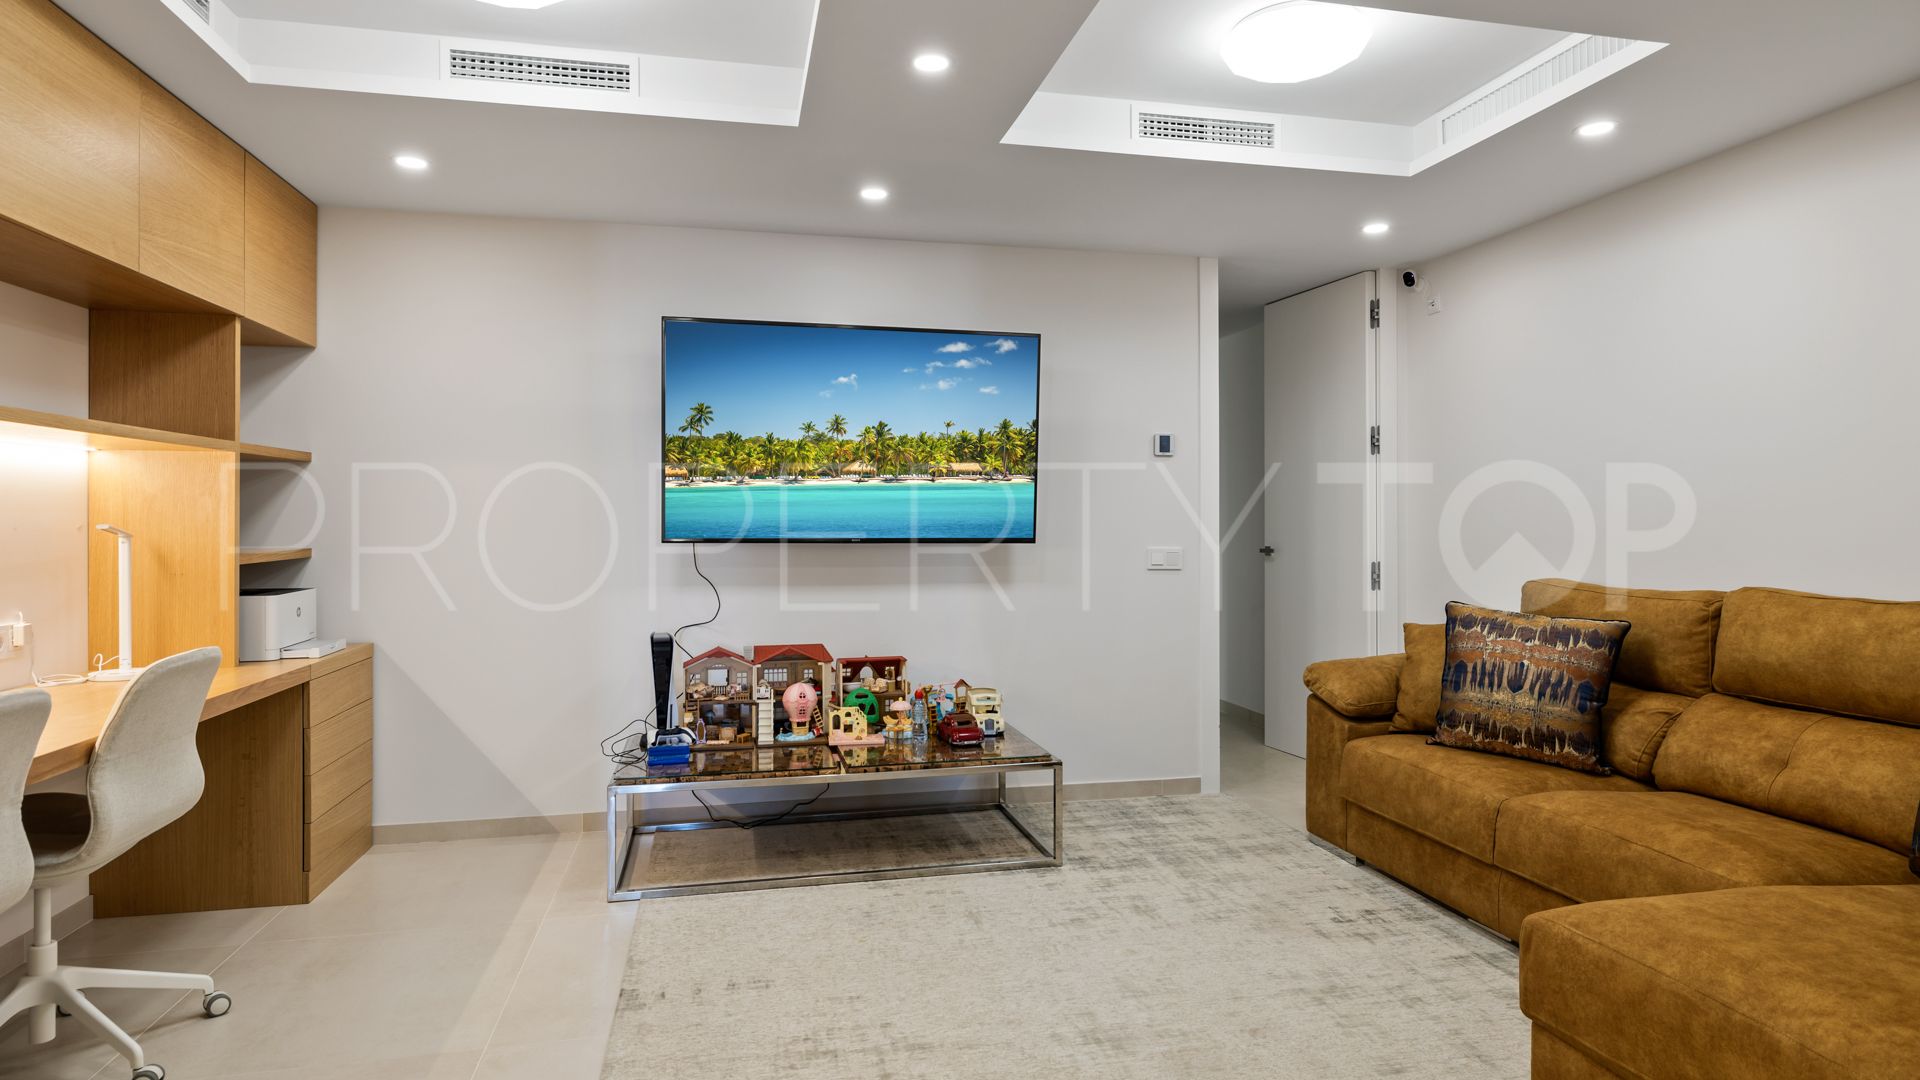 5 bedrooms apartment in 9 Lions Residences for sale